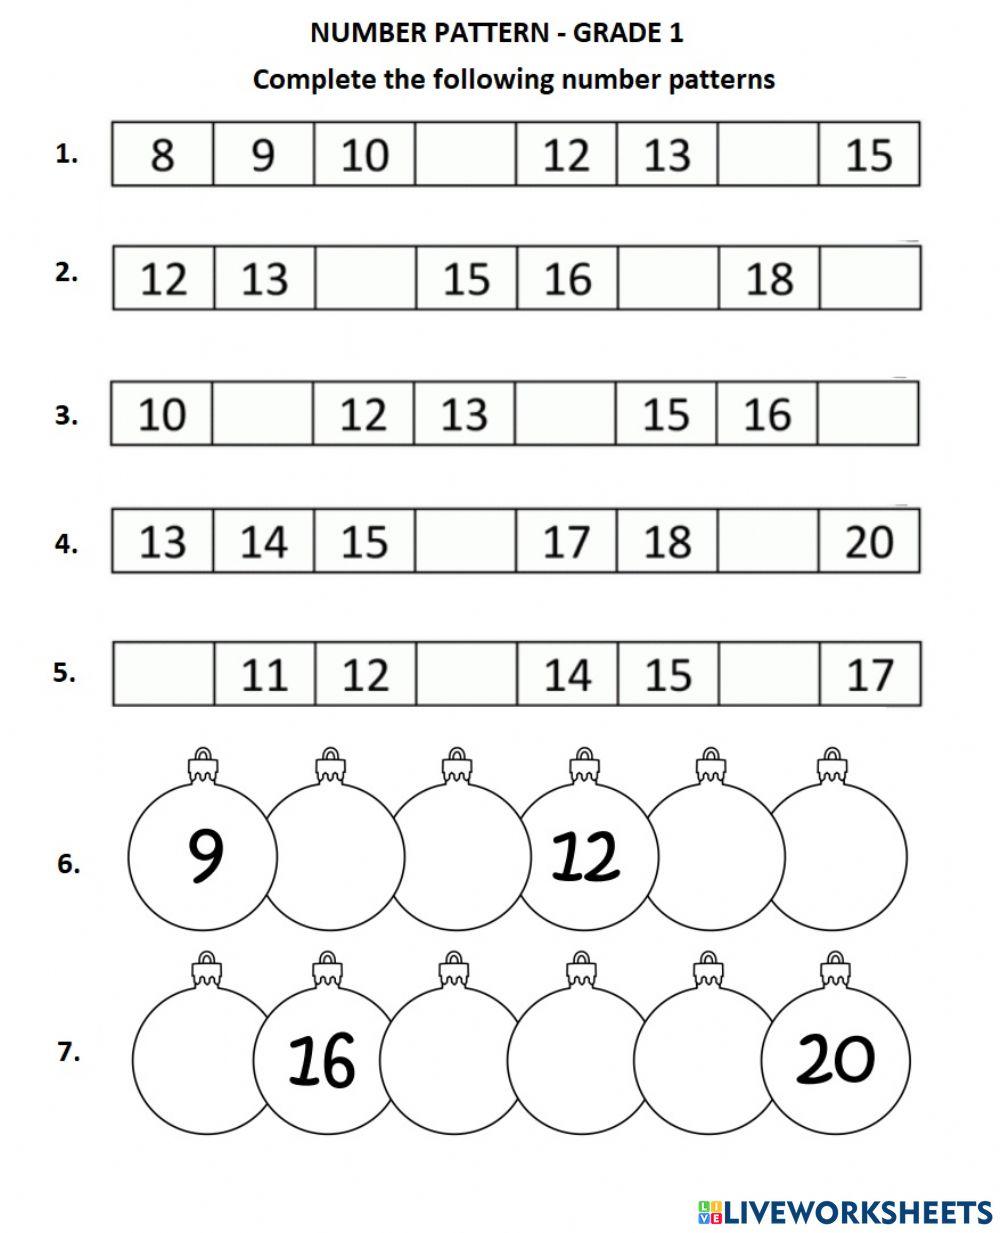 Number patterns to 20